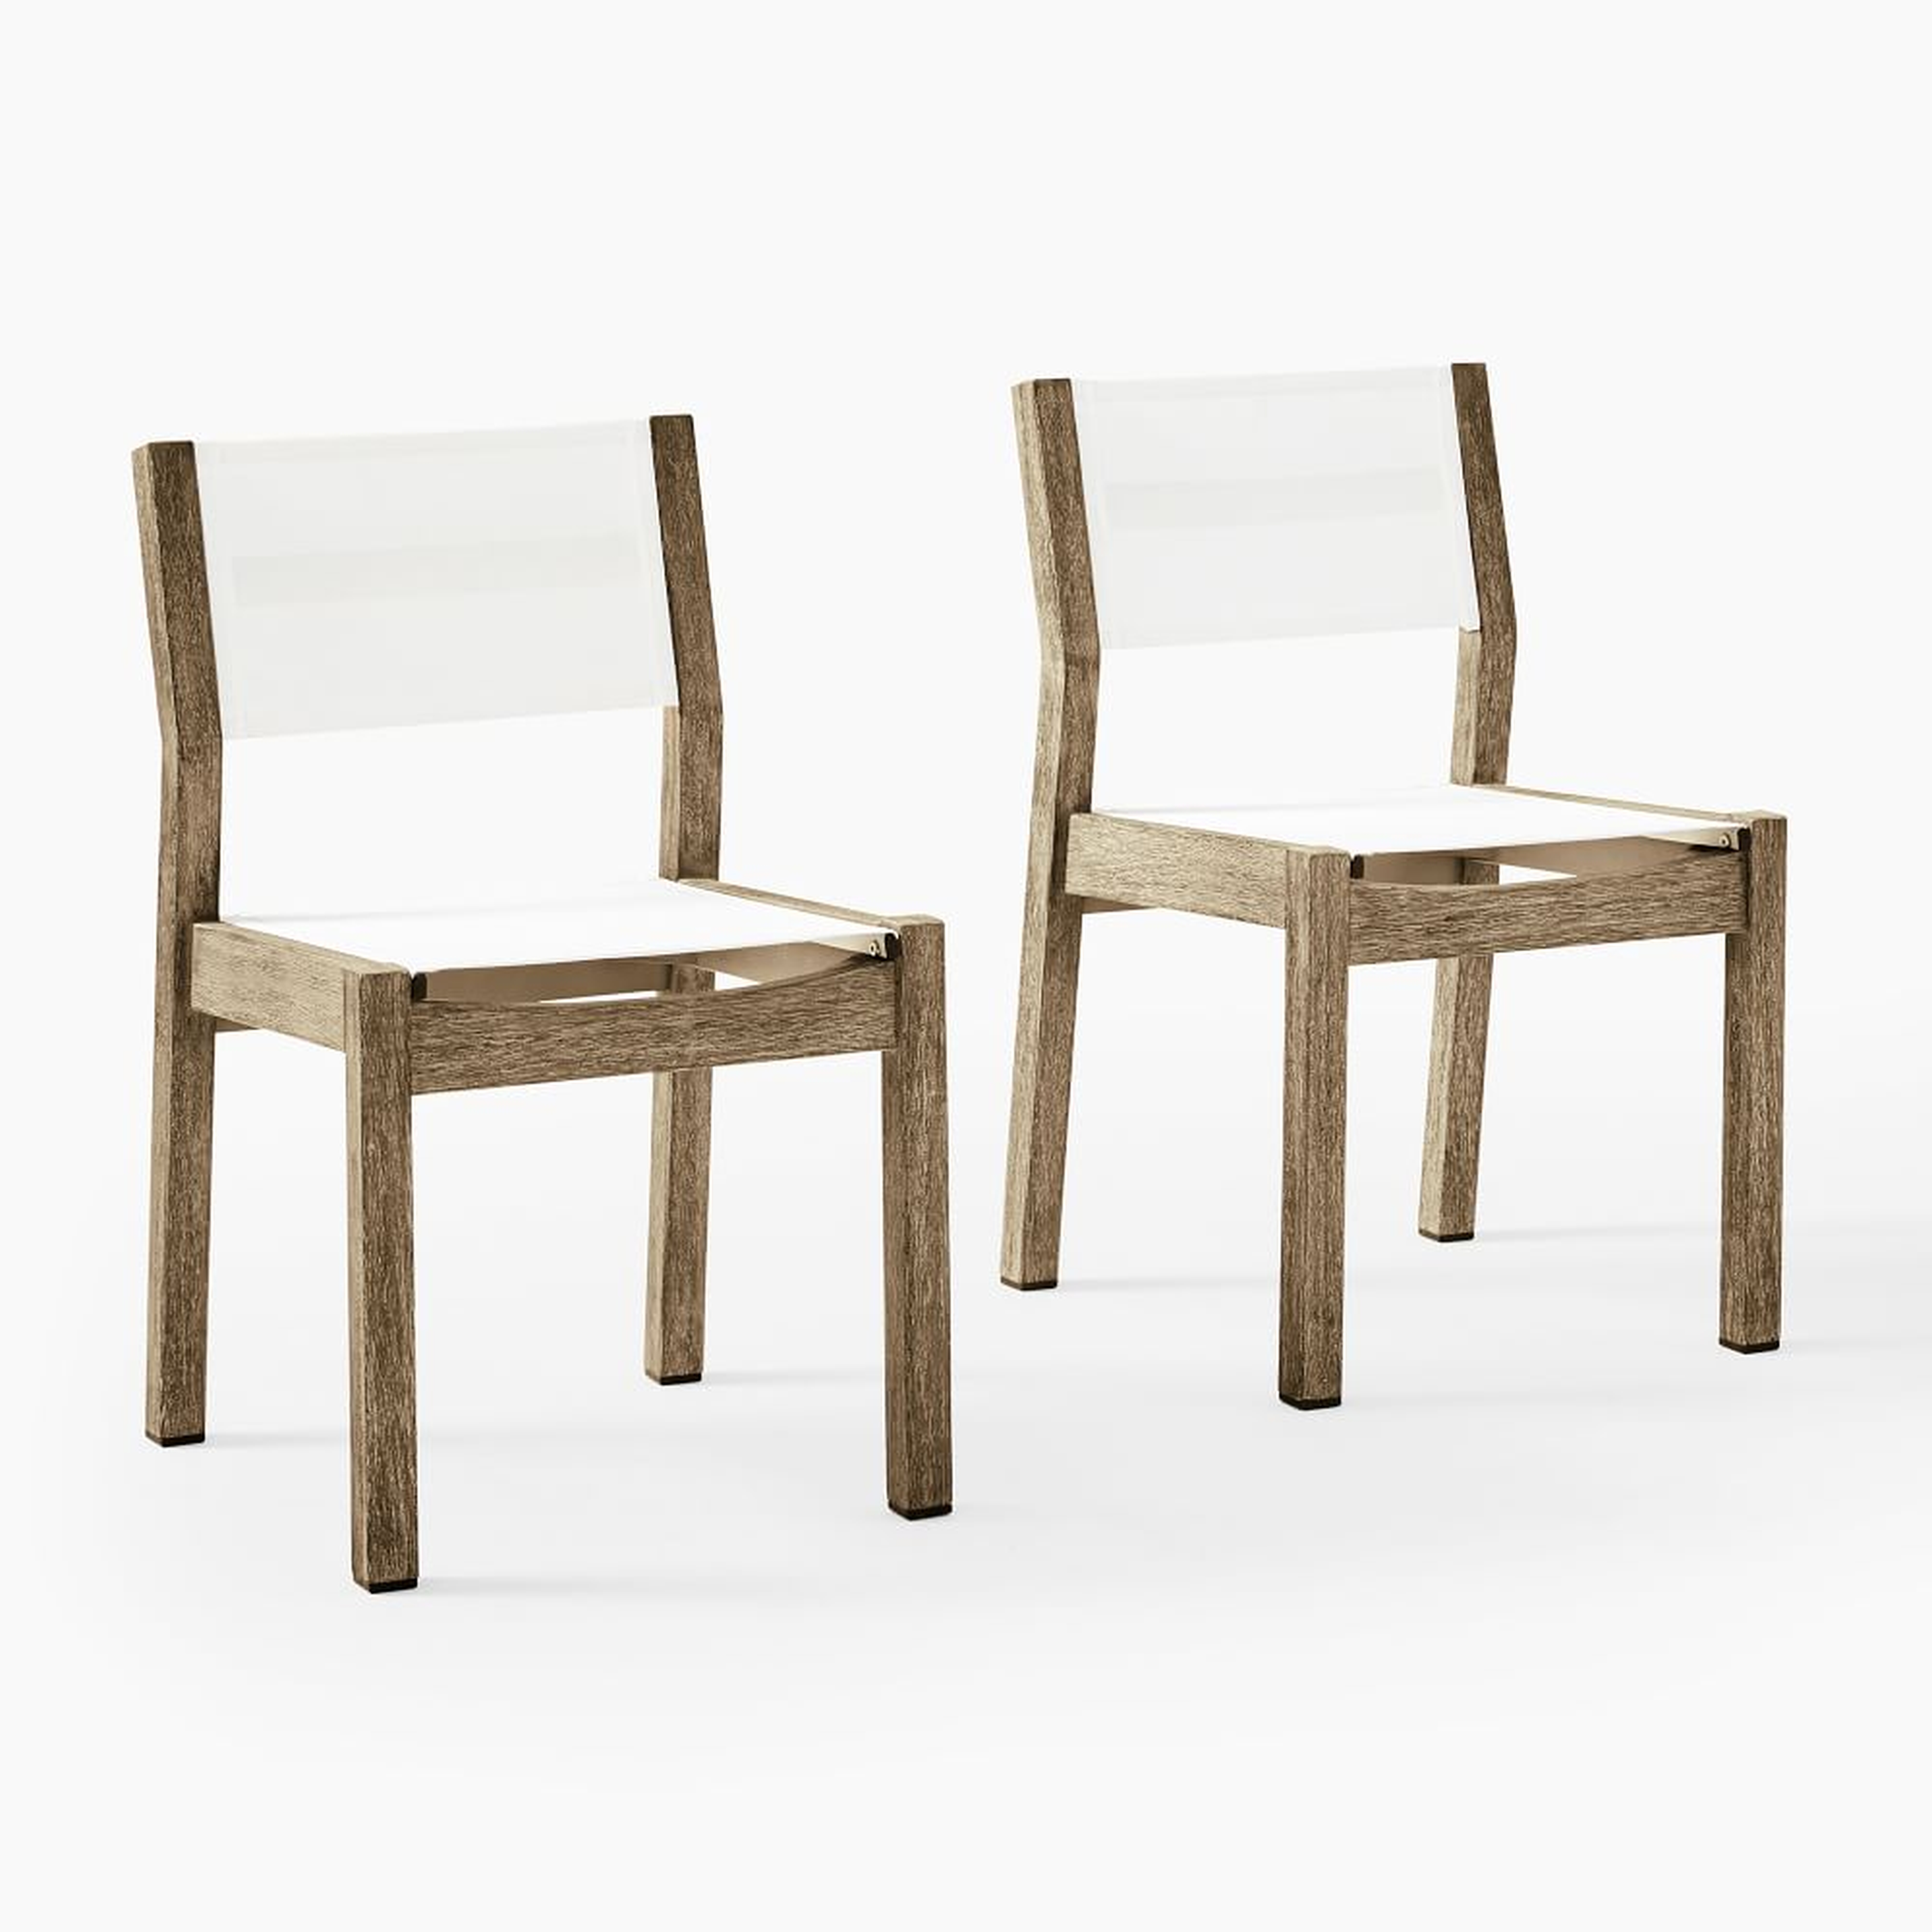 Portside Outdoor Textaline Dining Chairs, Driftwood, Set of 2 - West Elm